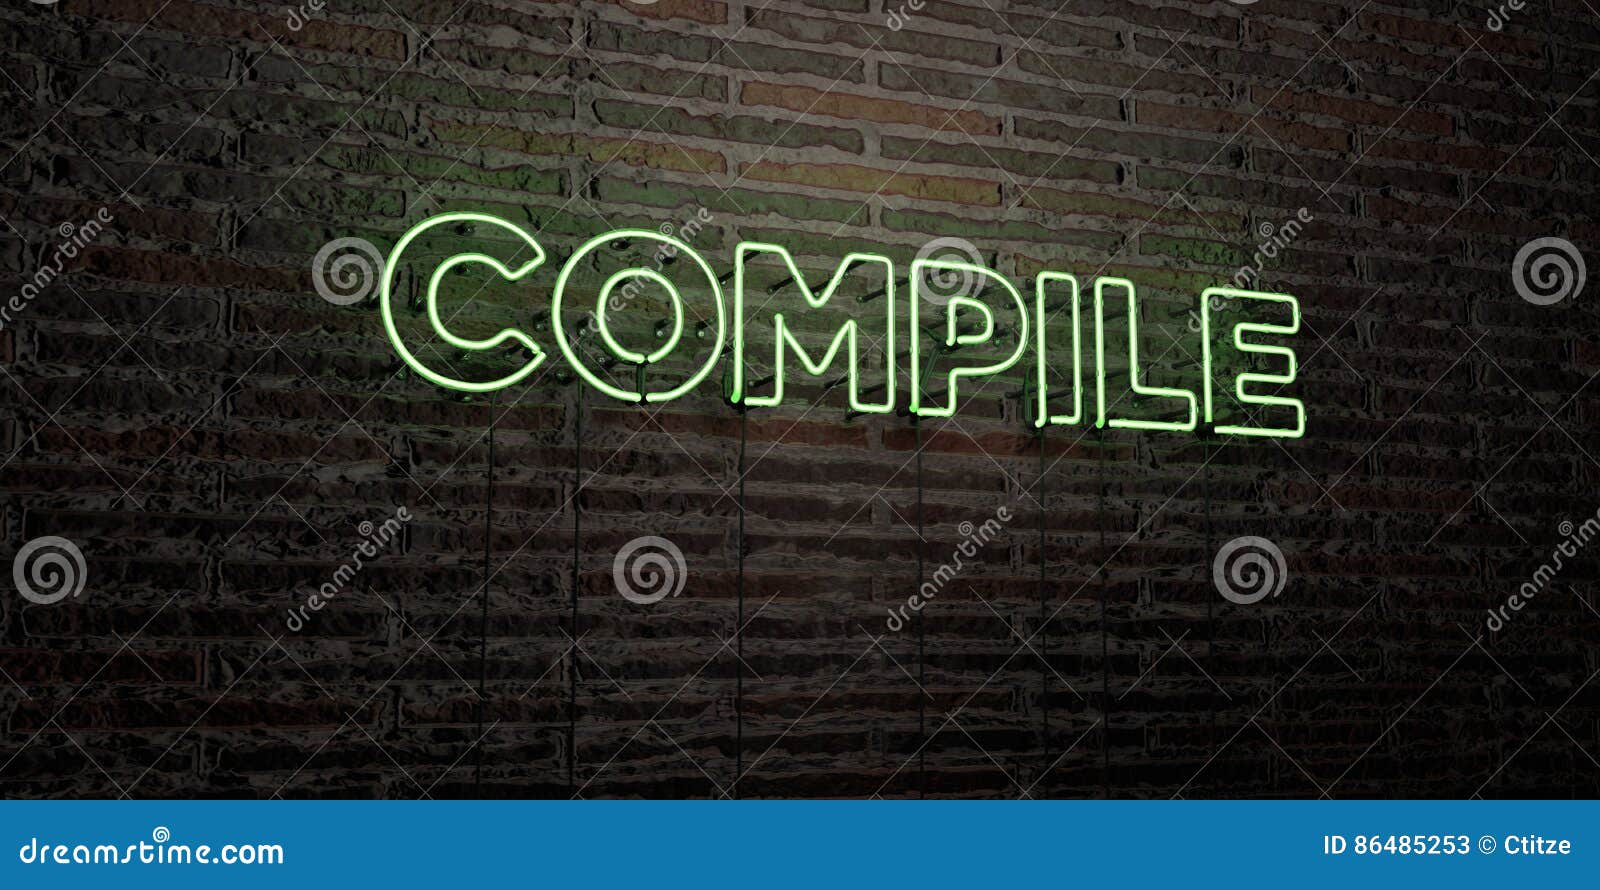 compile -realistic neon sign on brick wall background - 3d rendered royalty free stock image